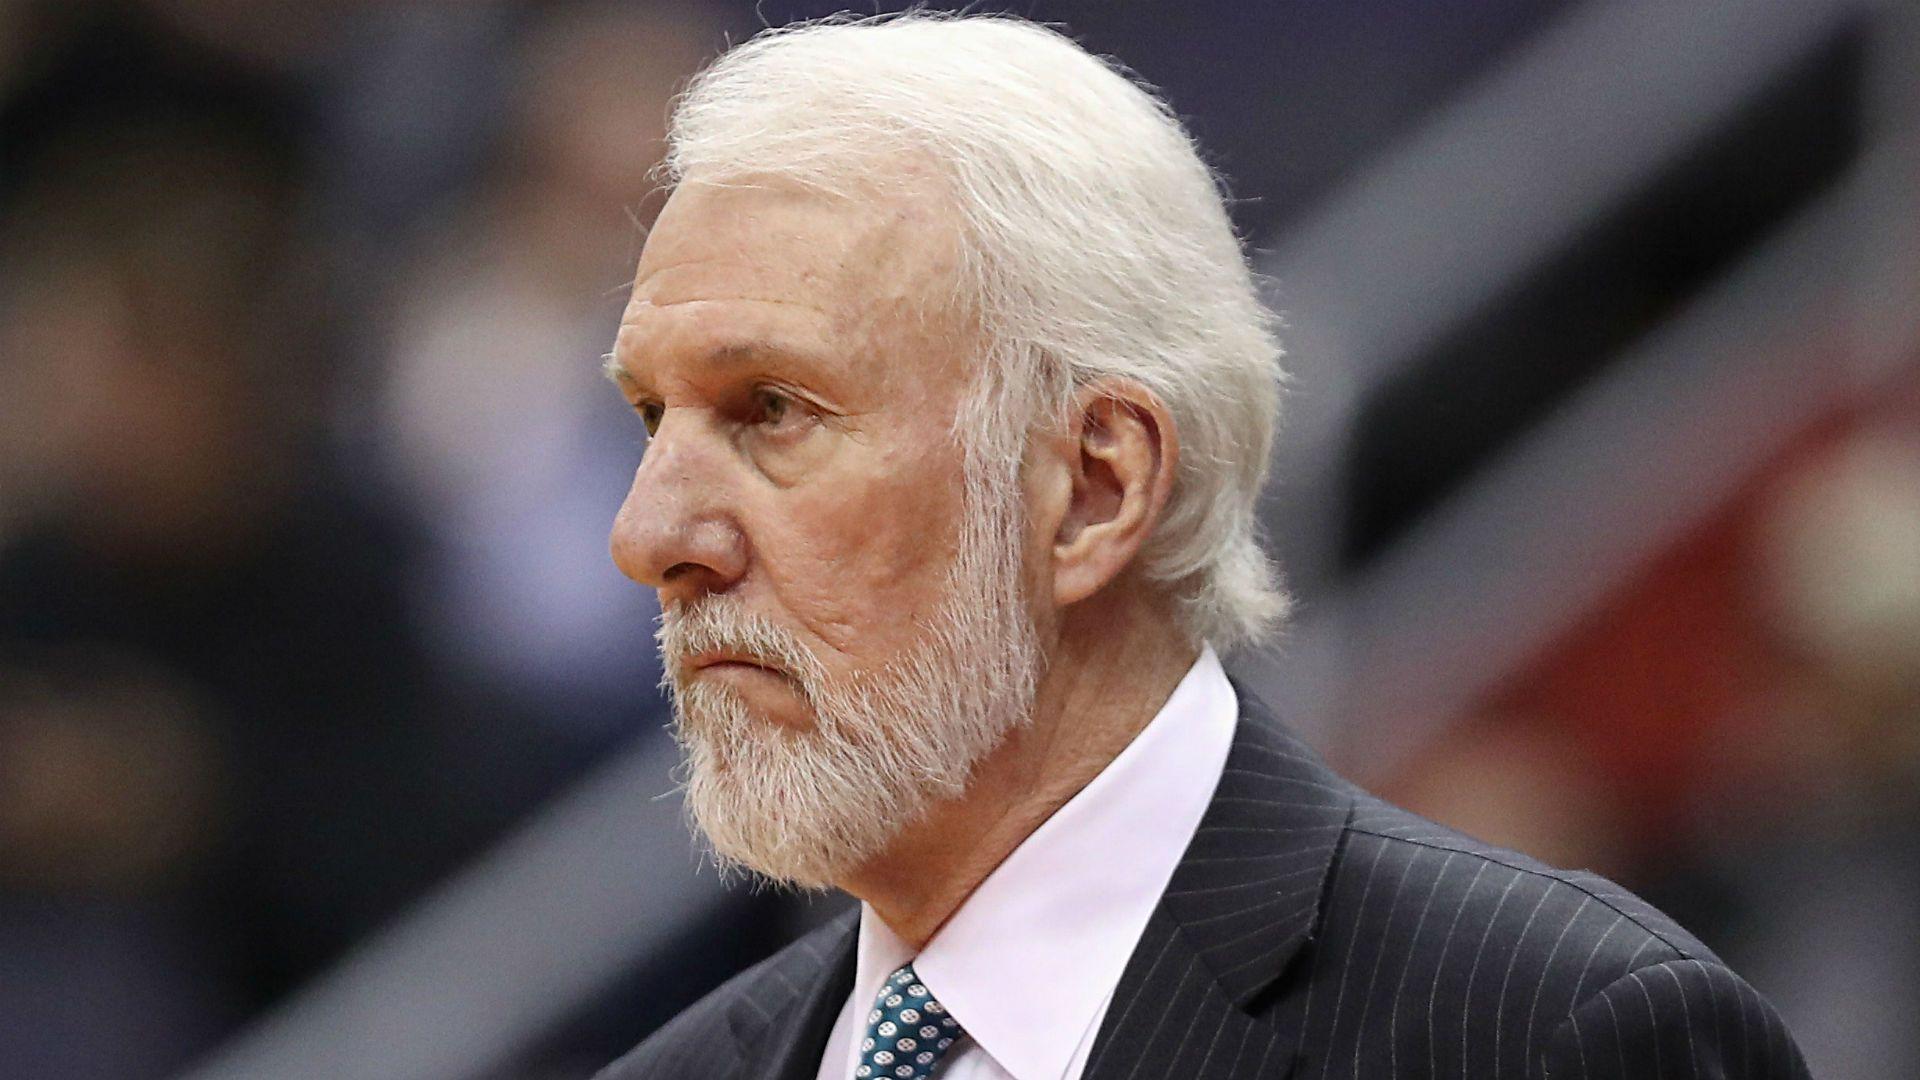 Gregg Popovich's words on racial inequality, white privilege will